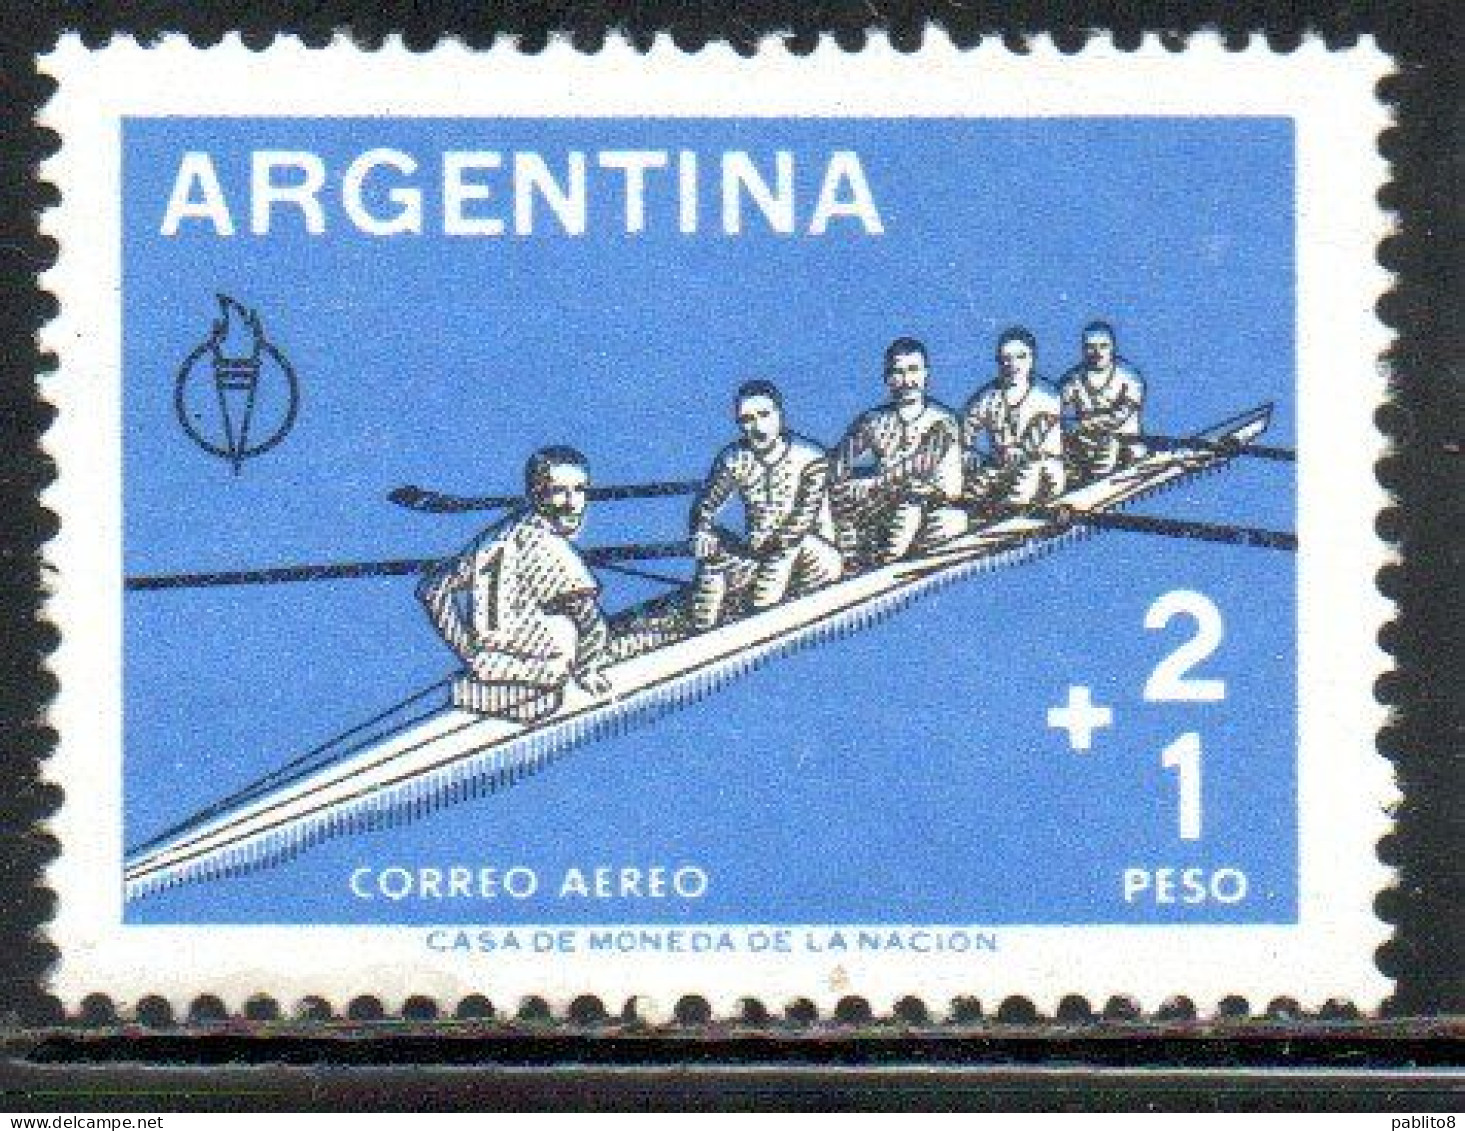 ARGENTINA 1959 AIR POST MAIL AIRMAIL CORREO AEREO ATHLETICS ROWING 2p + 1p MNH - Luchtpost